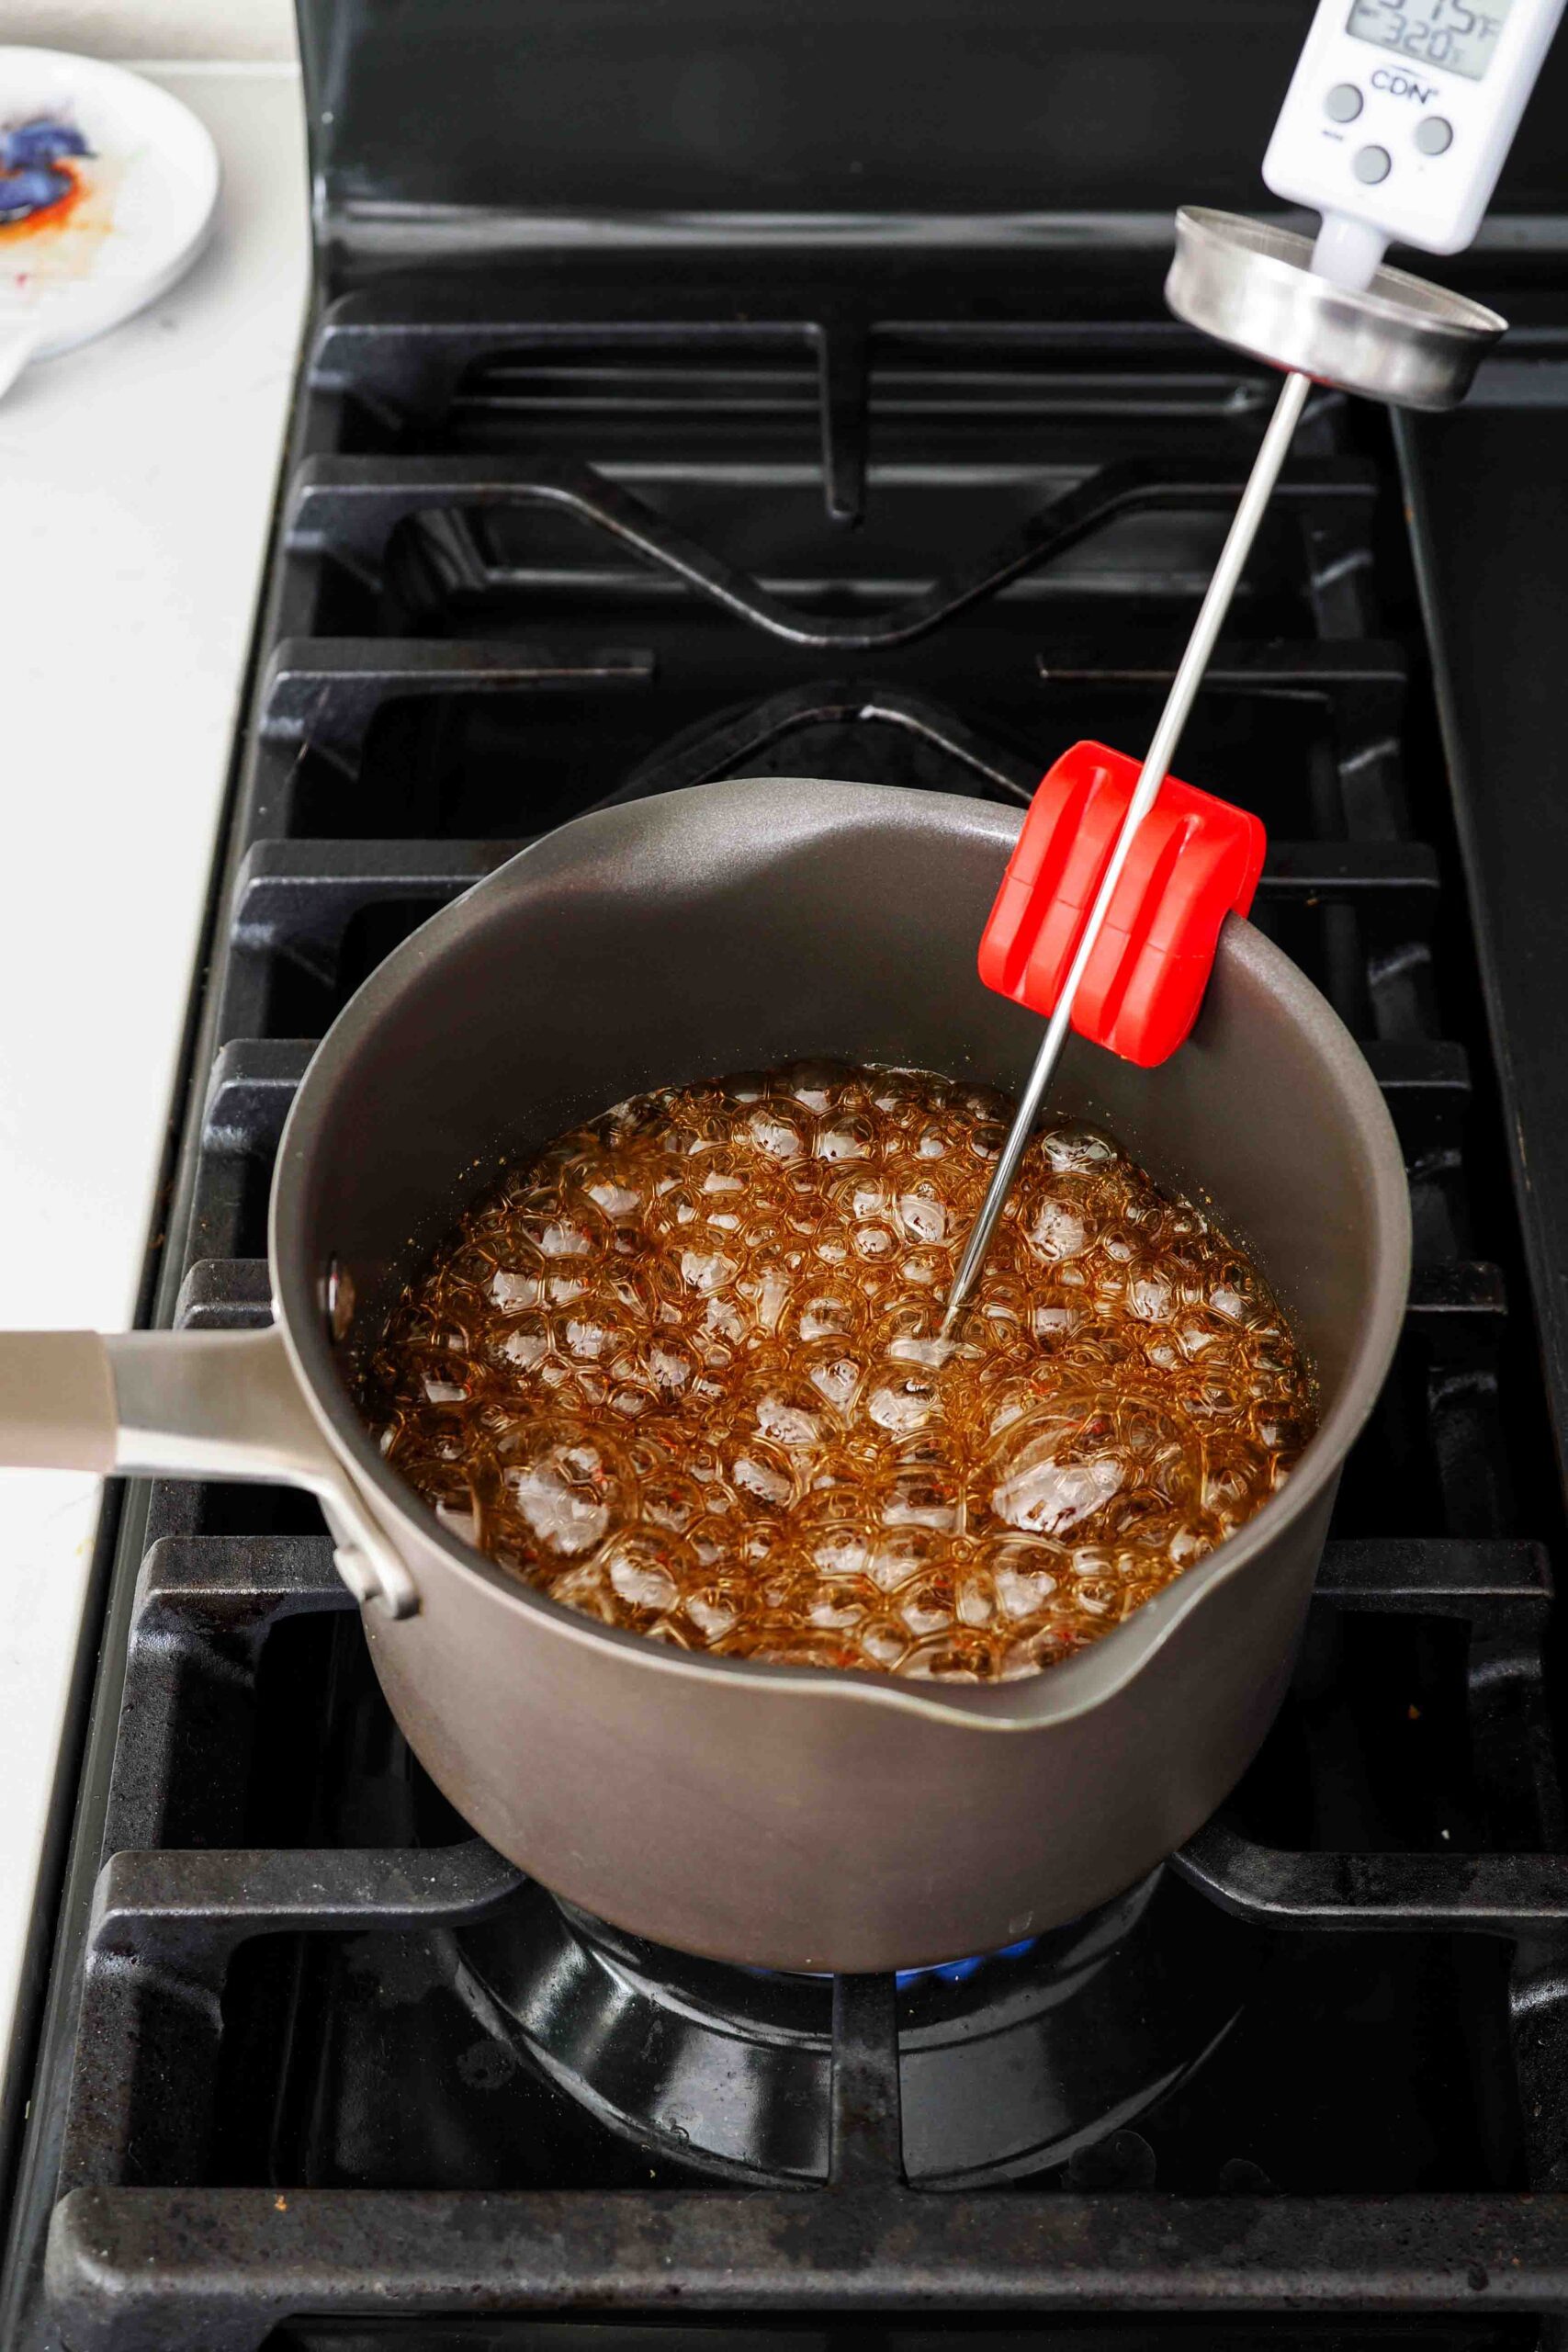 Caramel in a pot over the stove at 315°F.